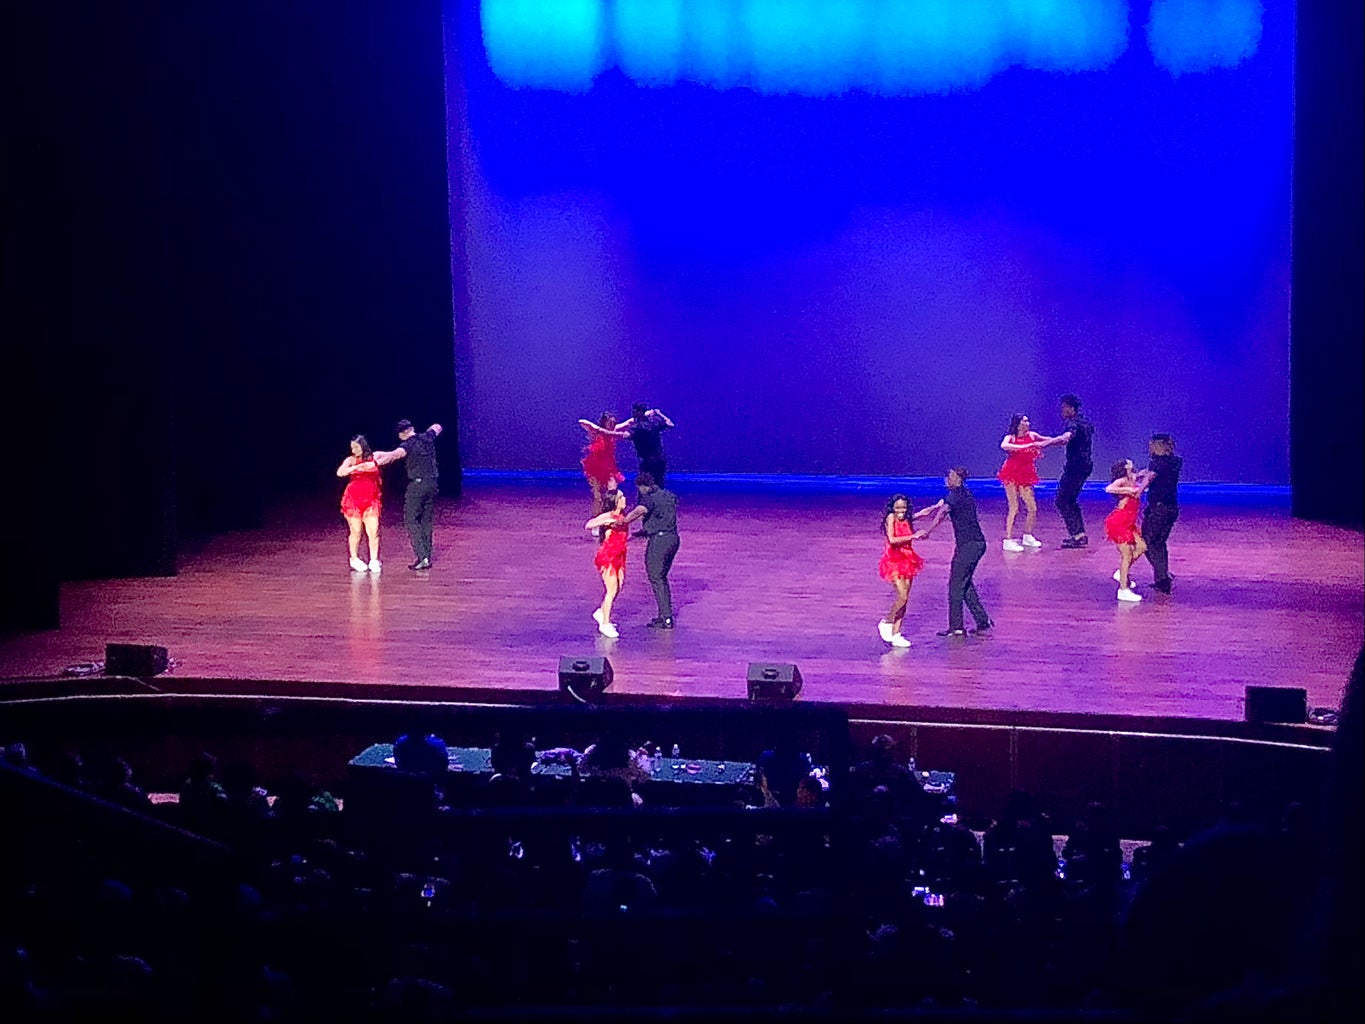 dancers in red